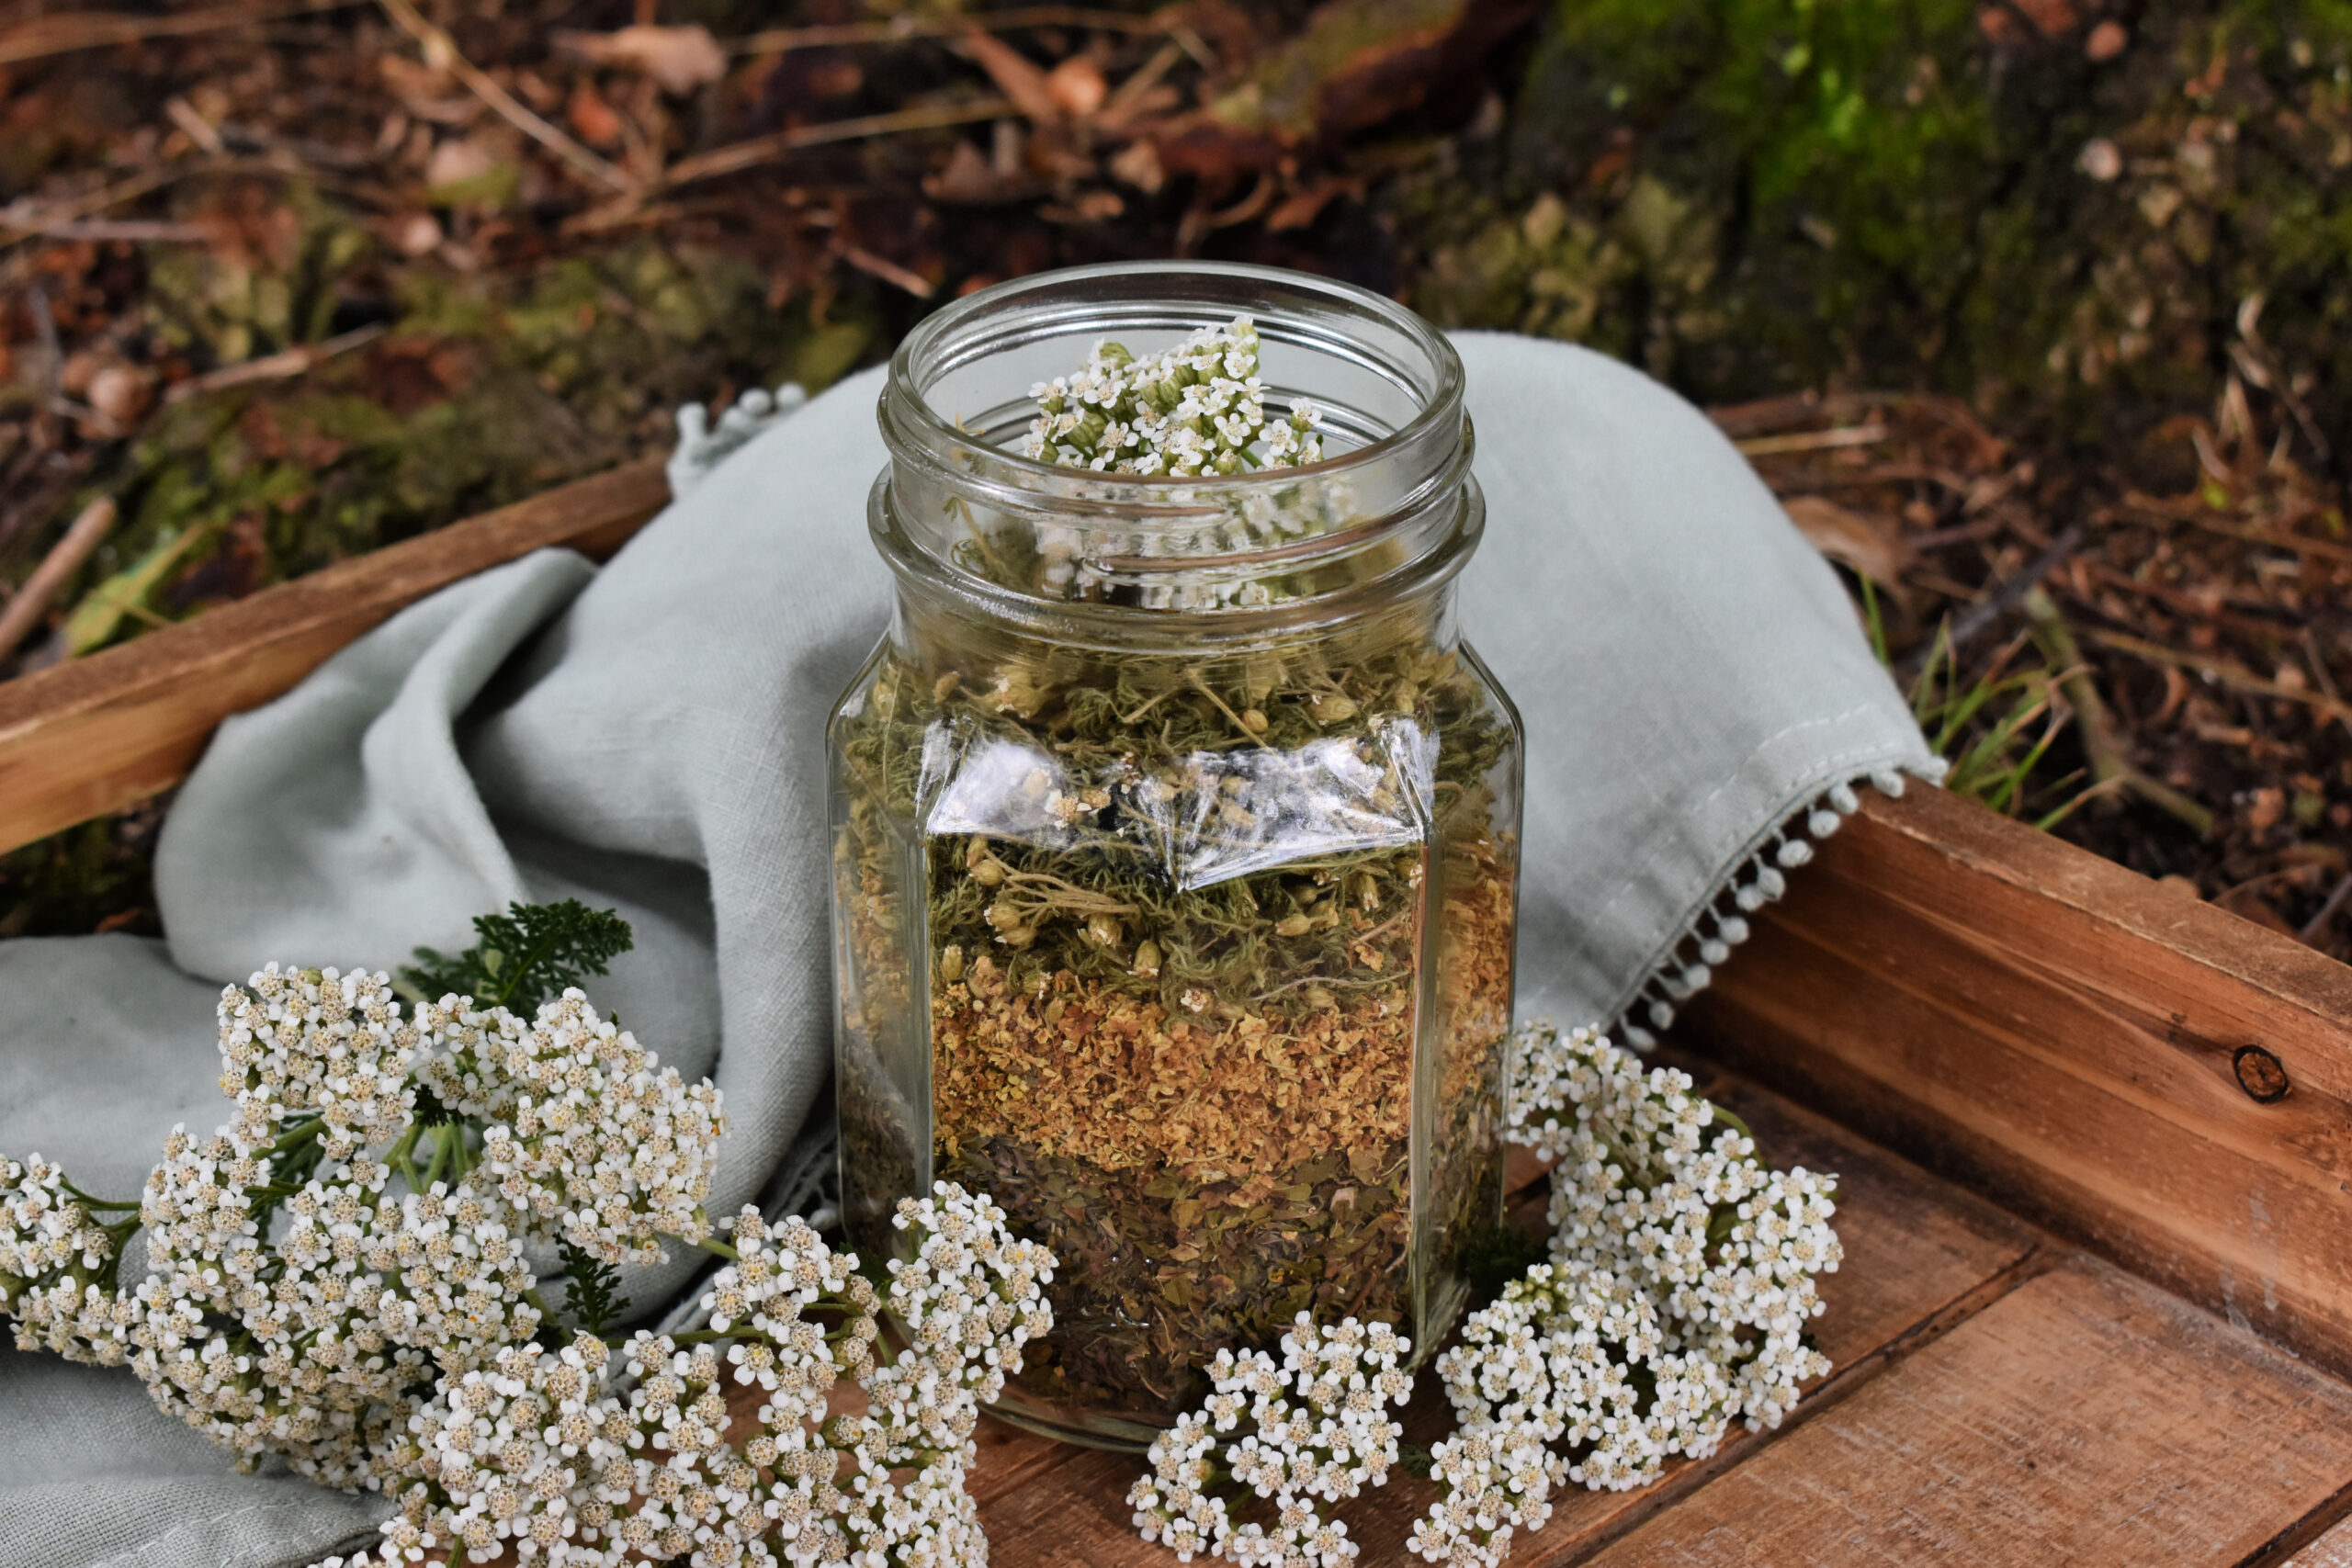 Where To Buy Dried Herbs